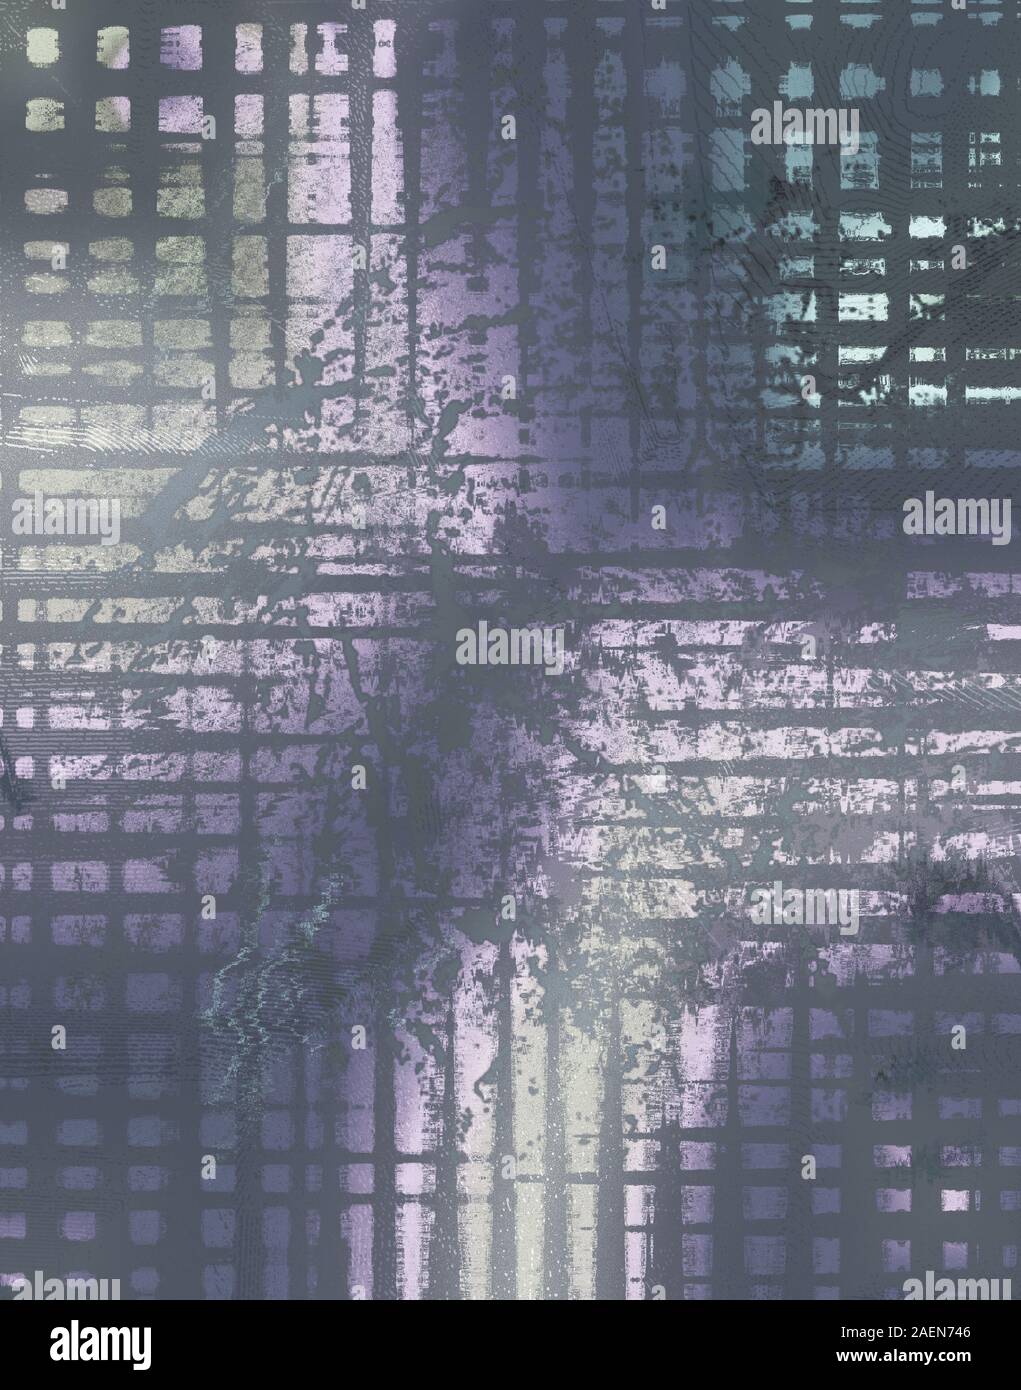 Abstract background with glitch effect design Stock Photo - Alamy